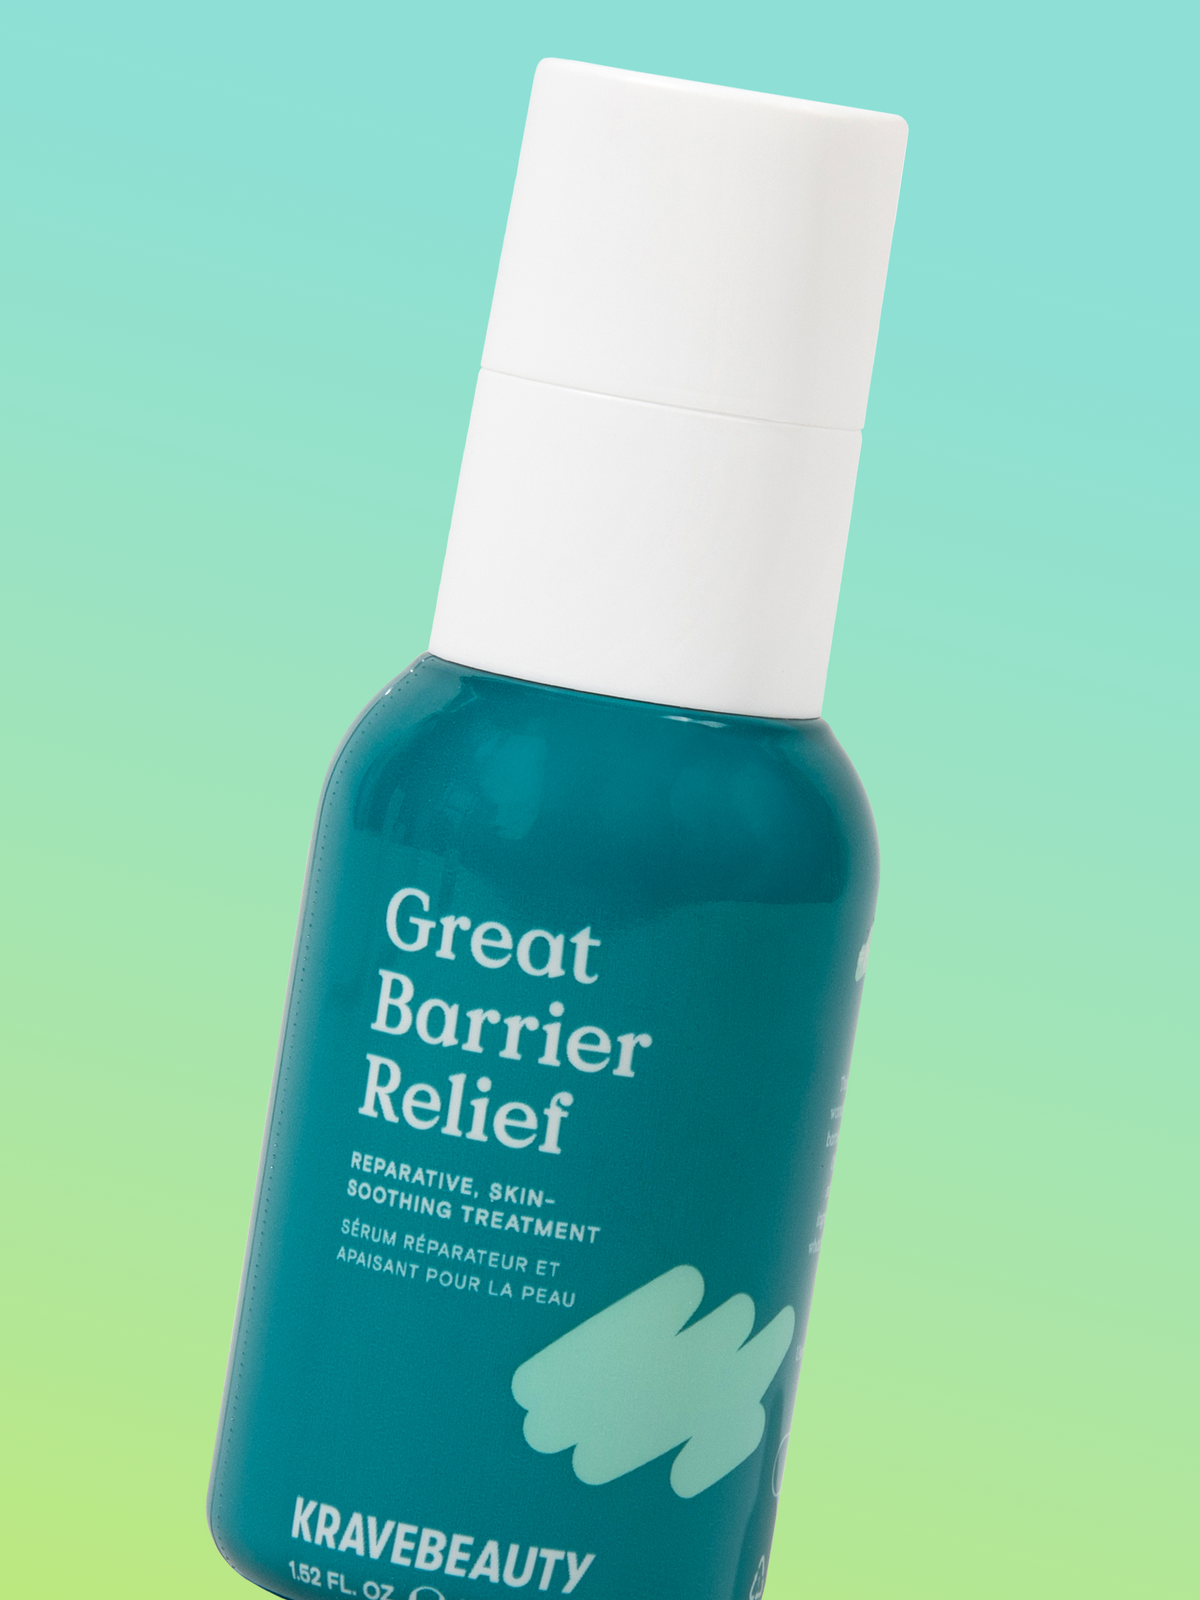 Great Barrier Relief reparative, skin-soothing serum is animal test-free and vegan #size_1.52 oz / 45 ml